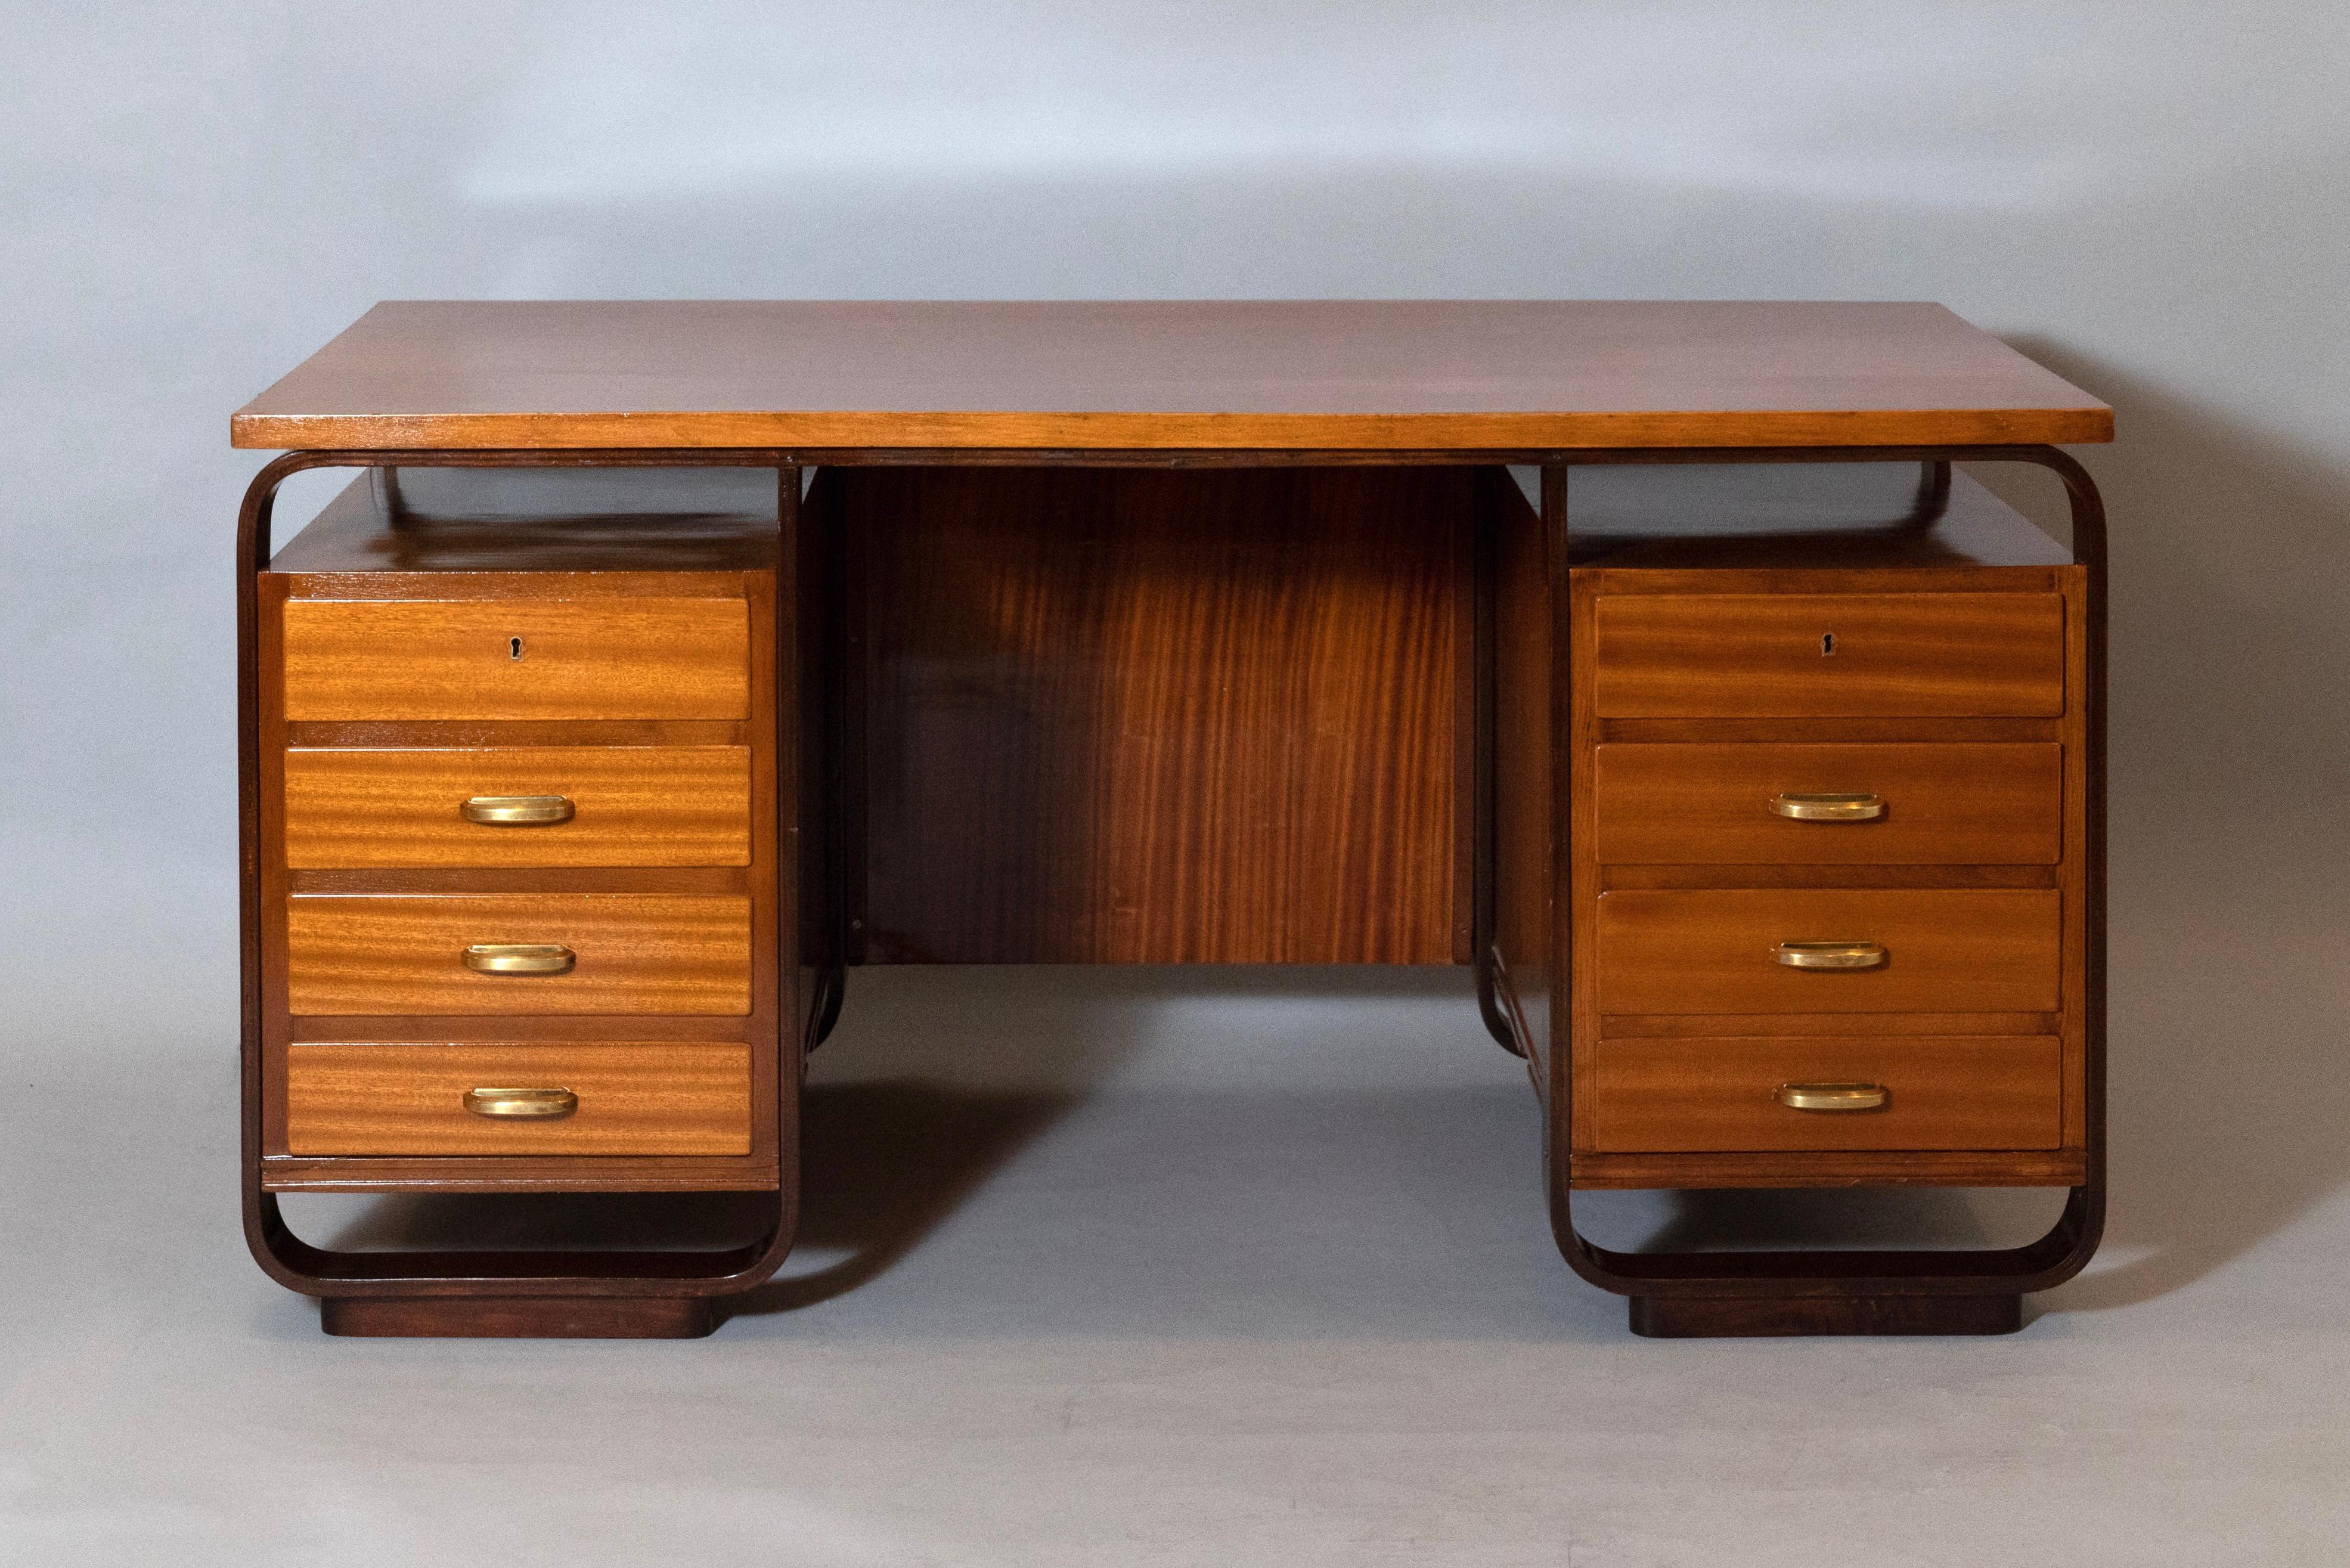 Italian Giuseppe Pagano: Eight Drawer Desk in Fruitwood and Brass, Italy 1940 For Sale